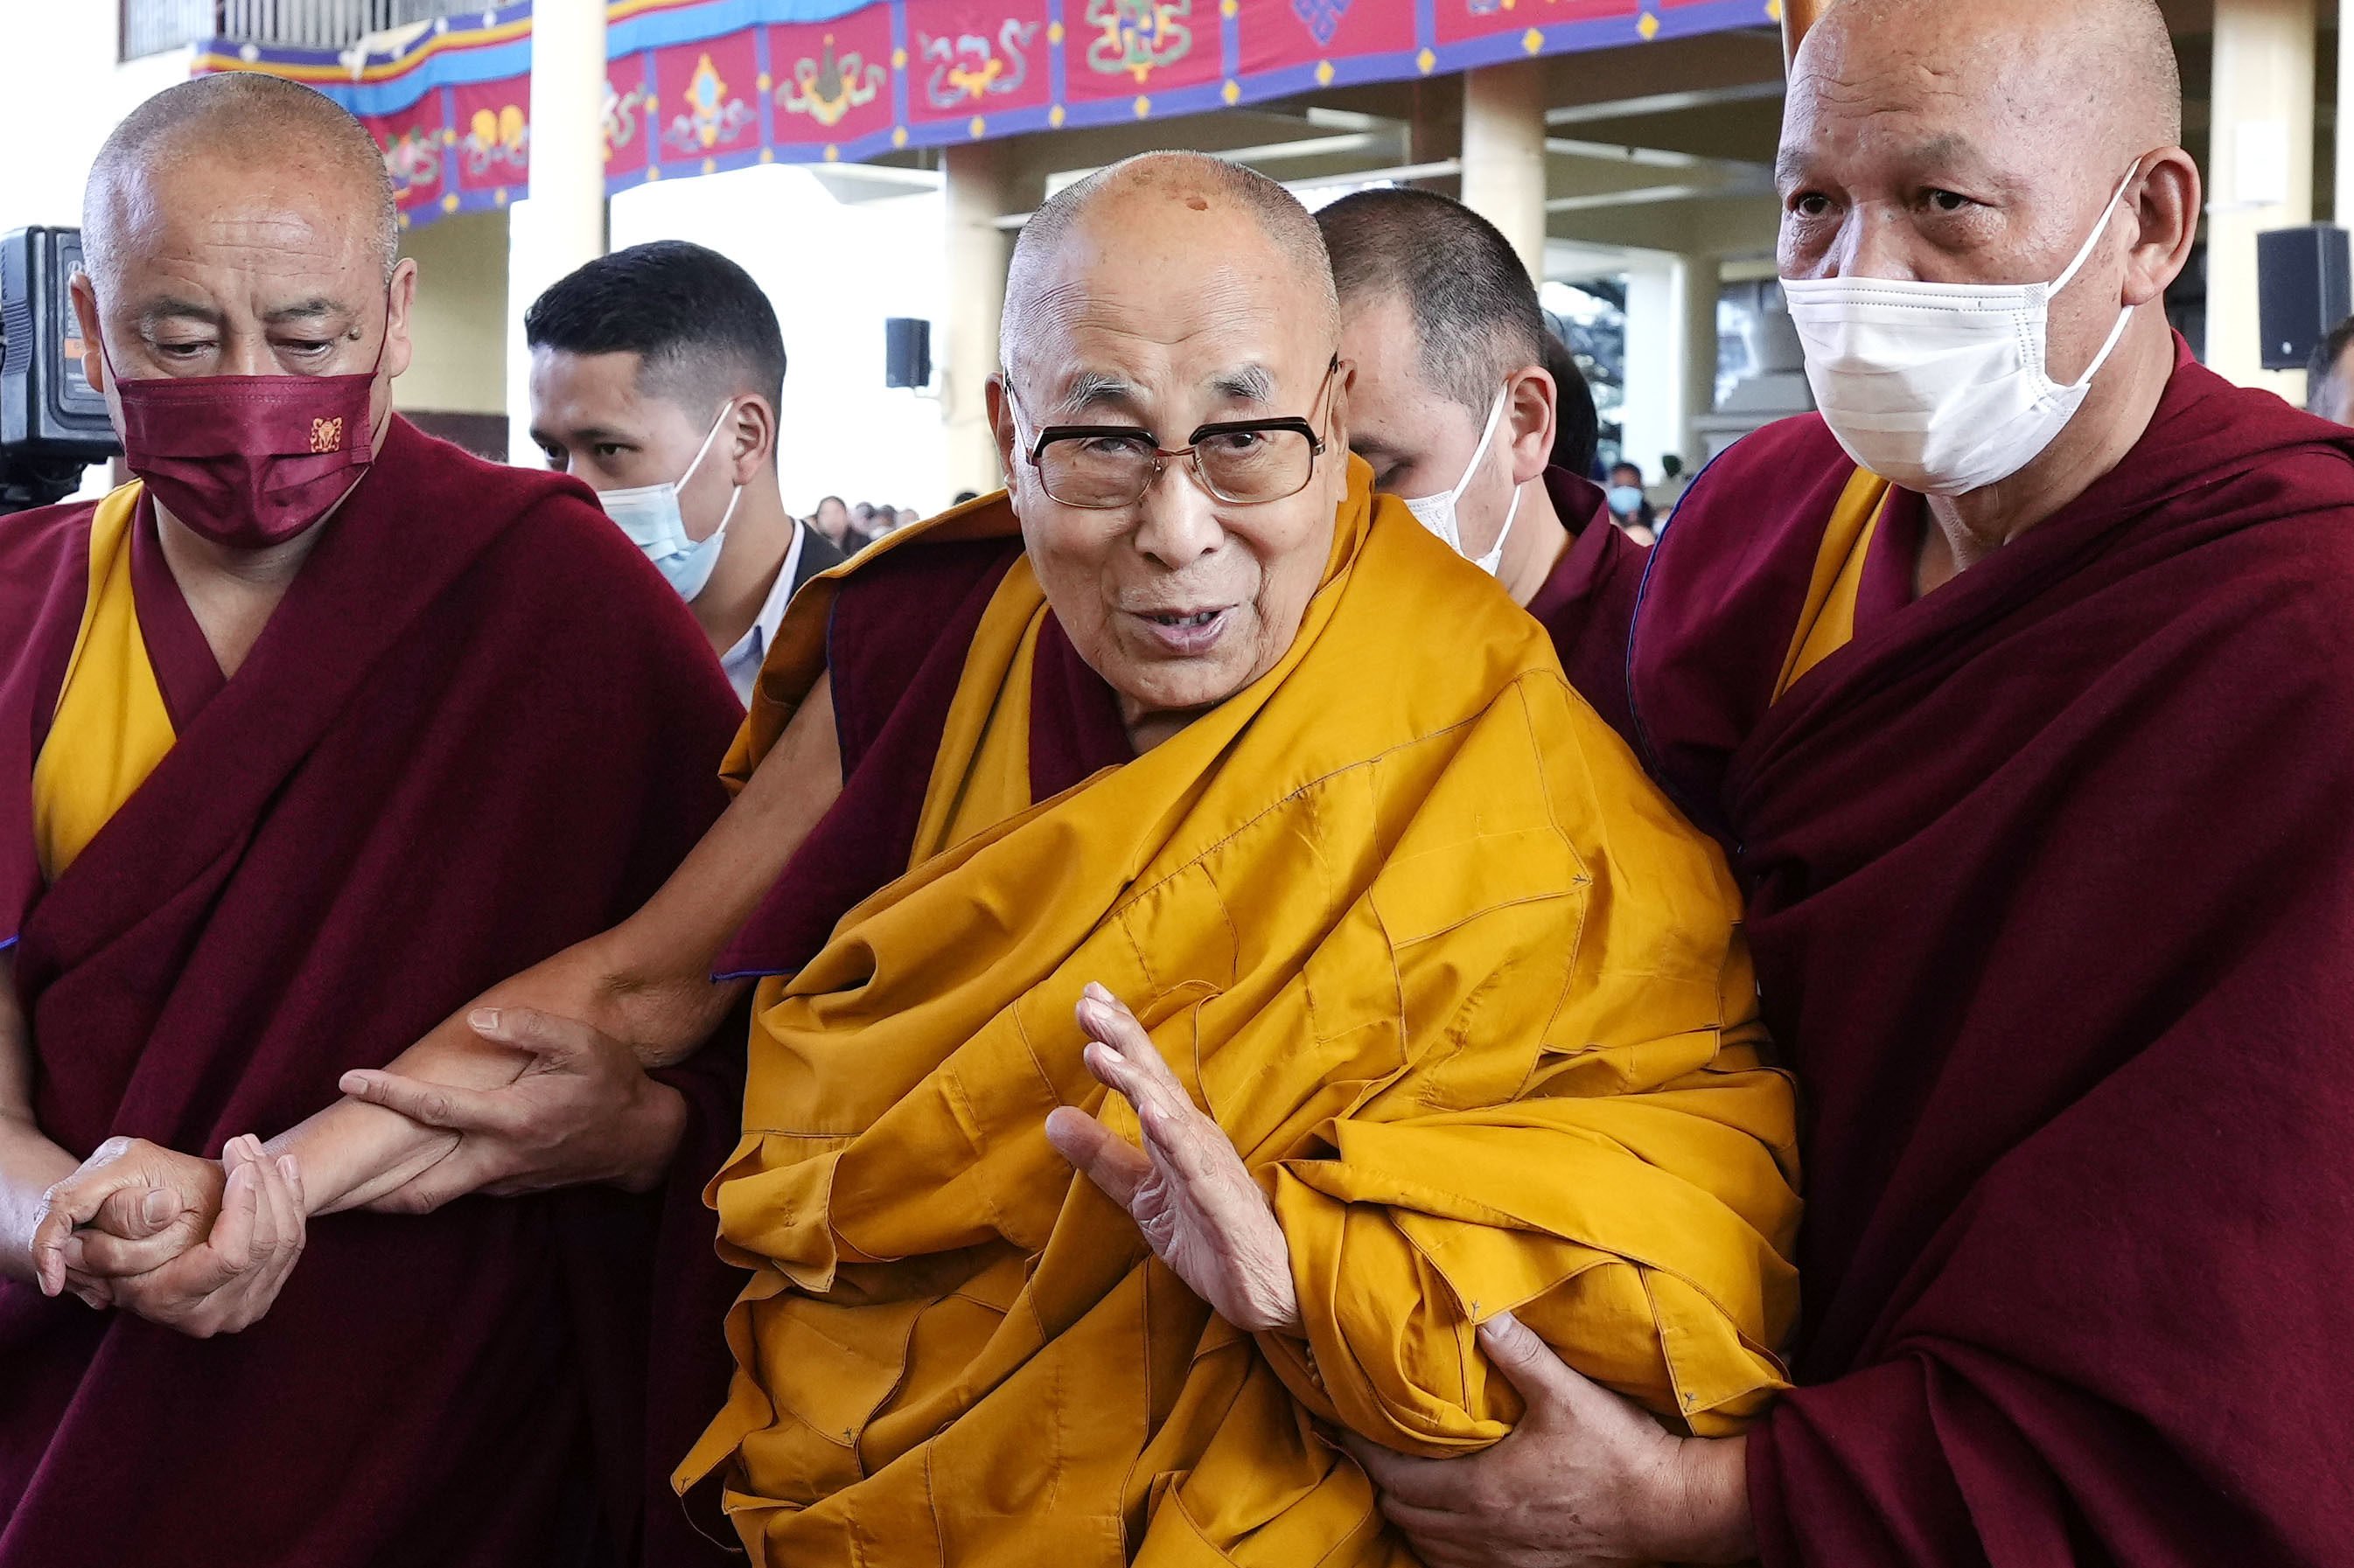 The Dalai Lama (centre) in the northern Indian city of Dharamsala. Photo: Kyodo